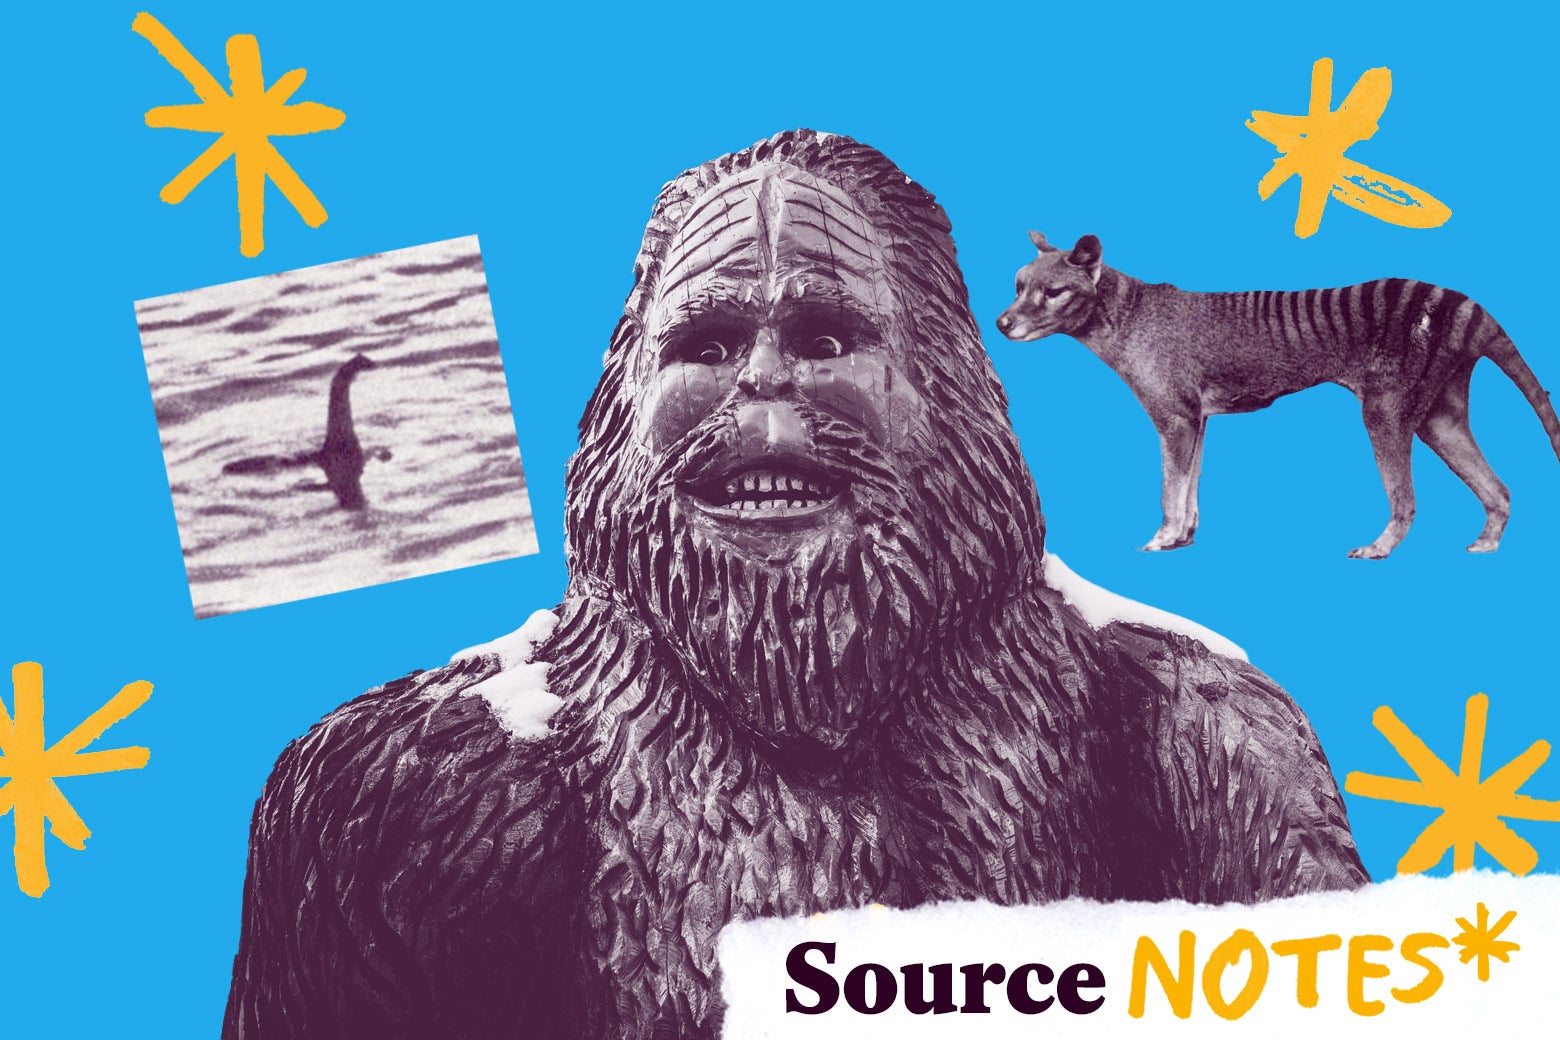 A Bigfoot, the Lochness Monster, and a Tasmanian tiger above a logo that says Source Notes.